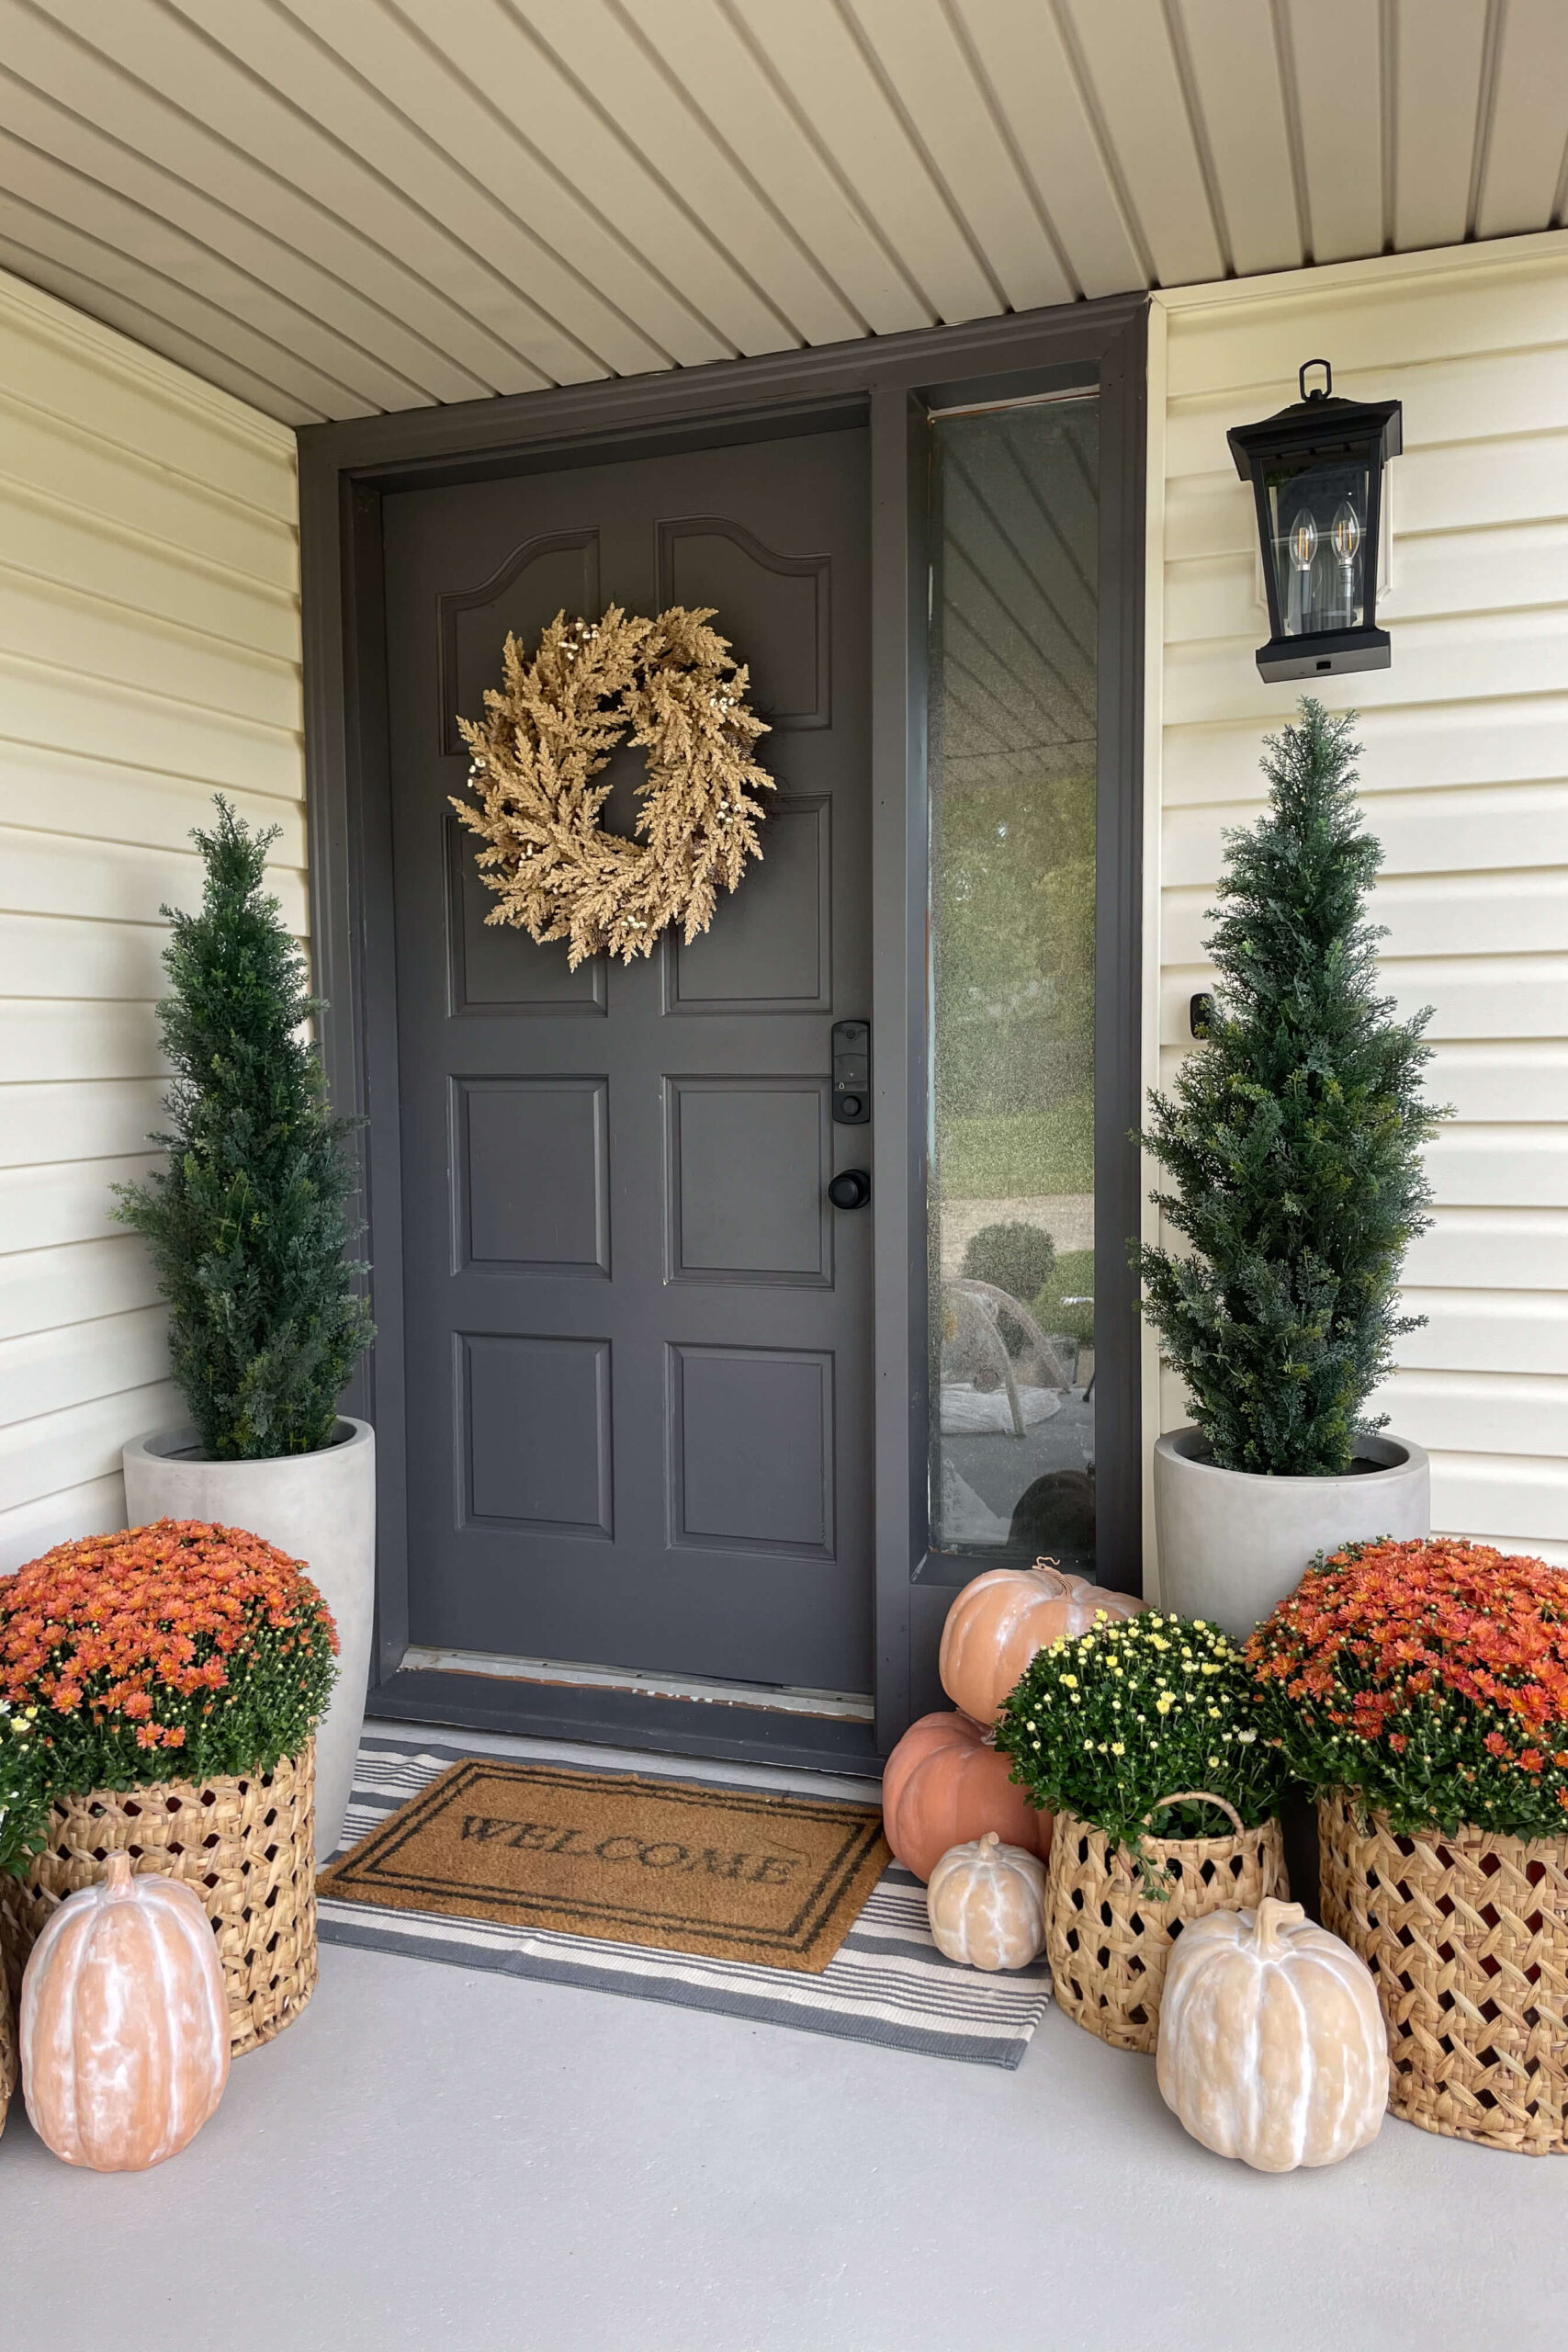 Decorating a small porch for fall.